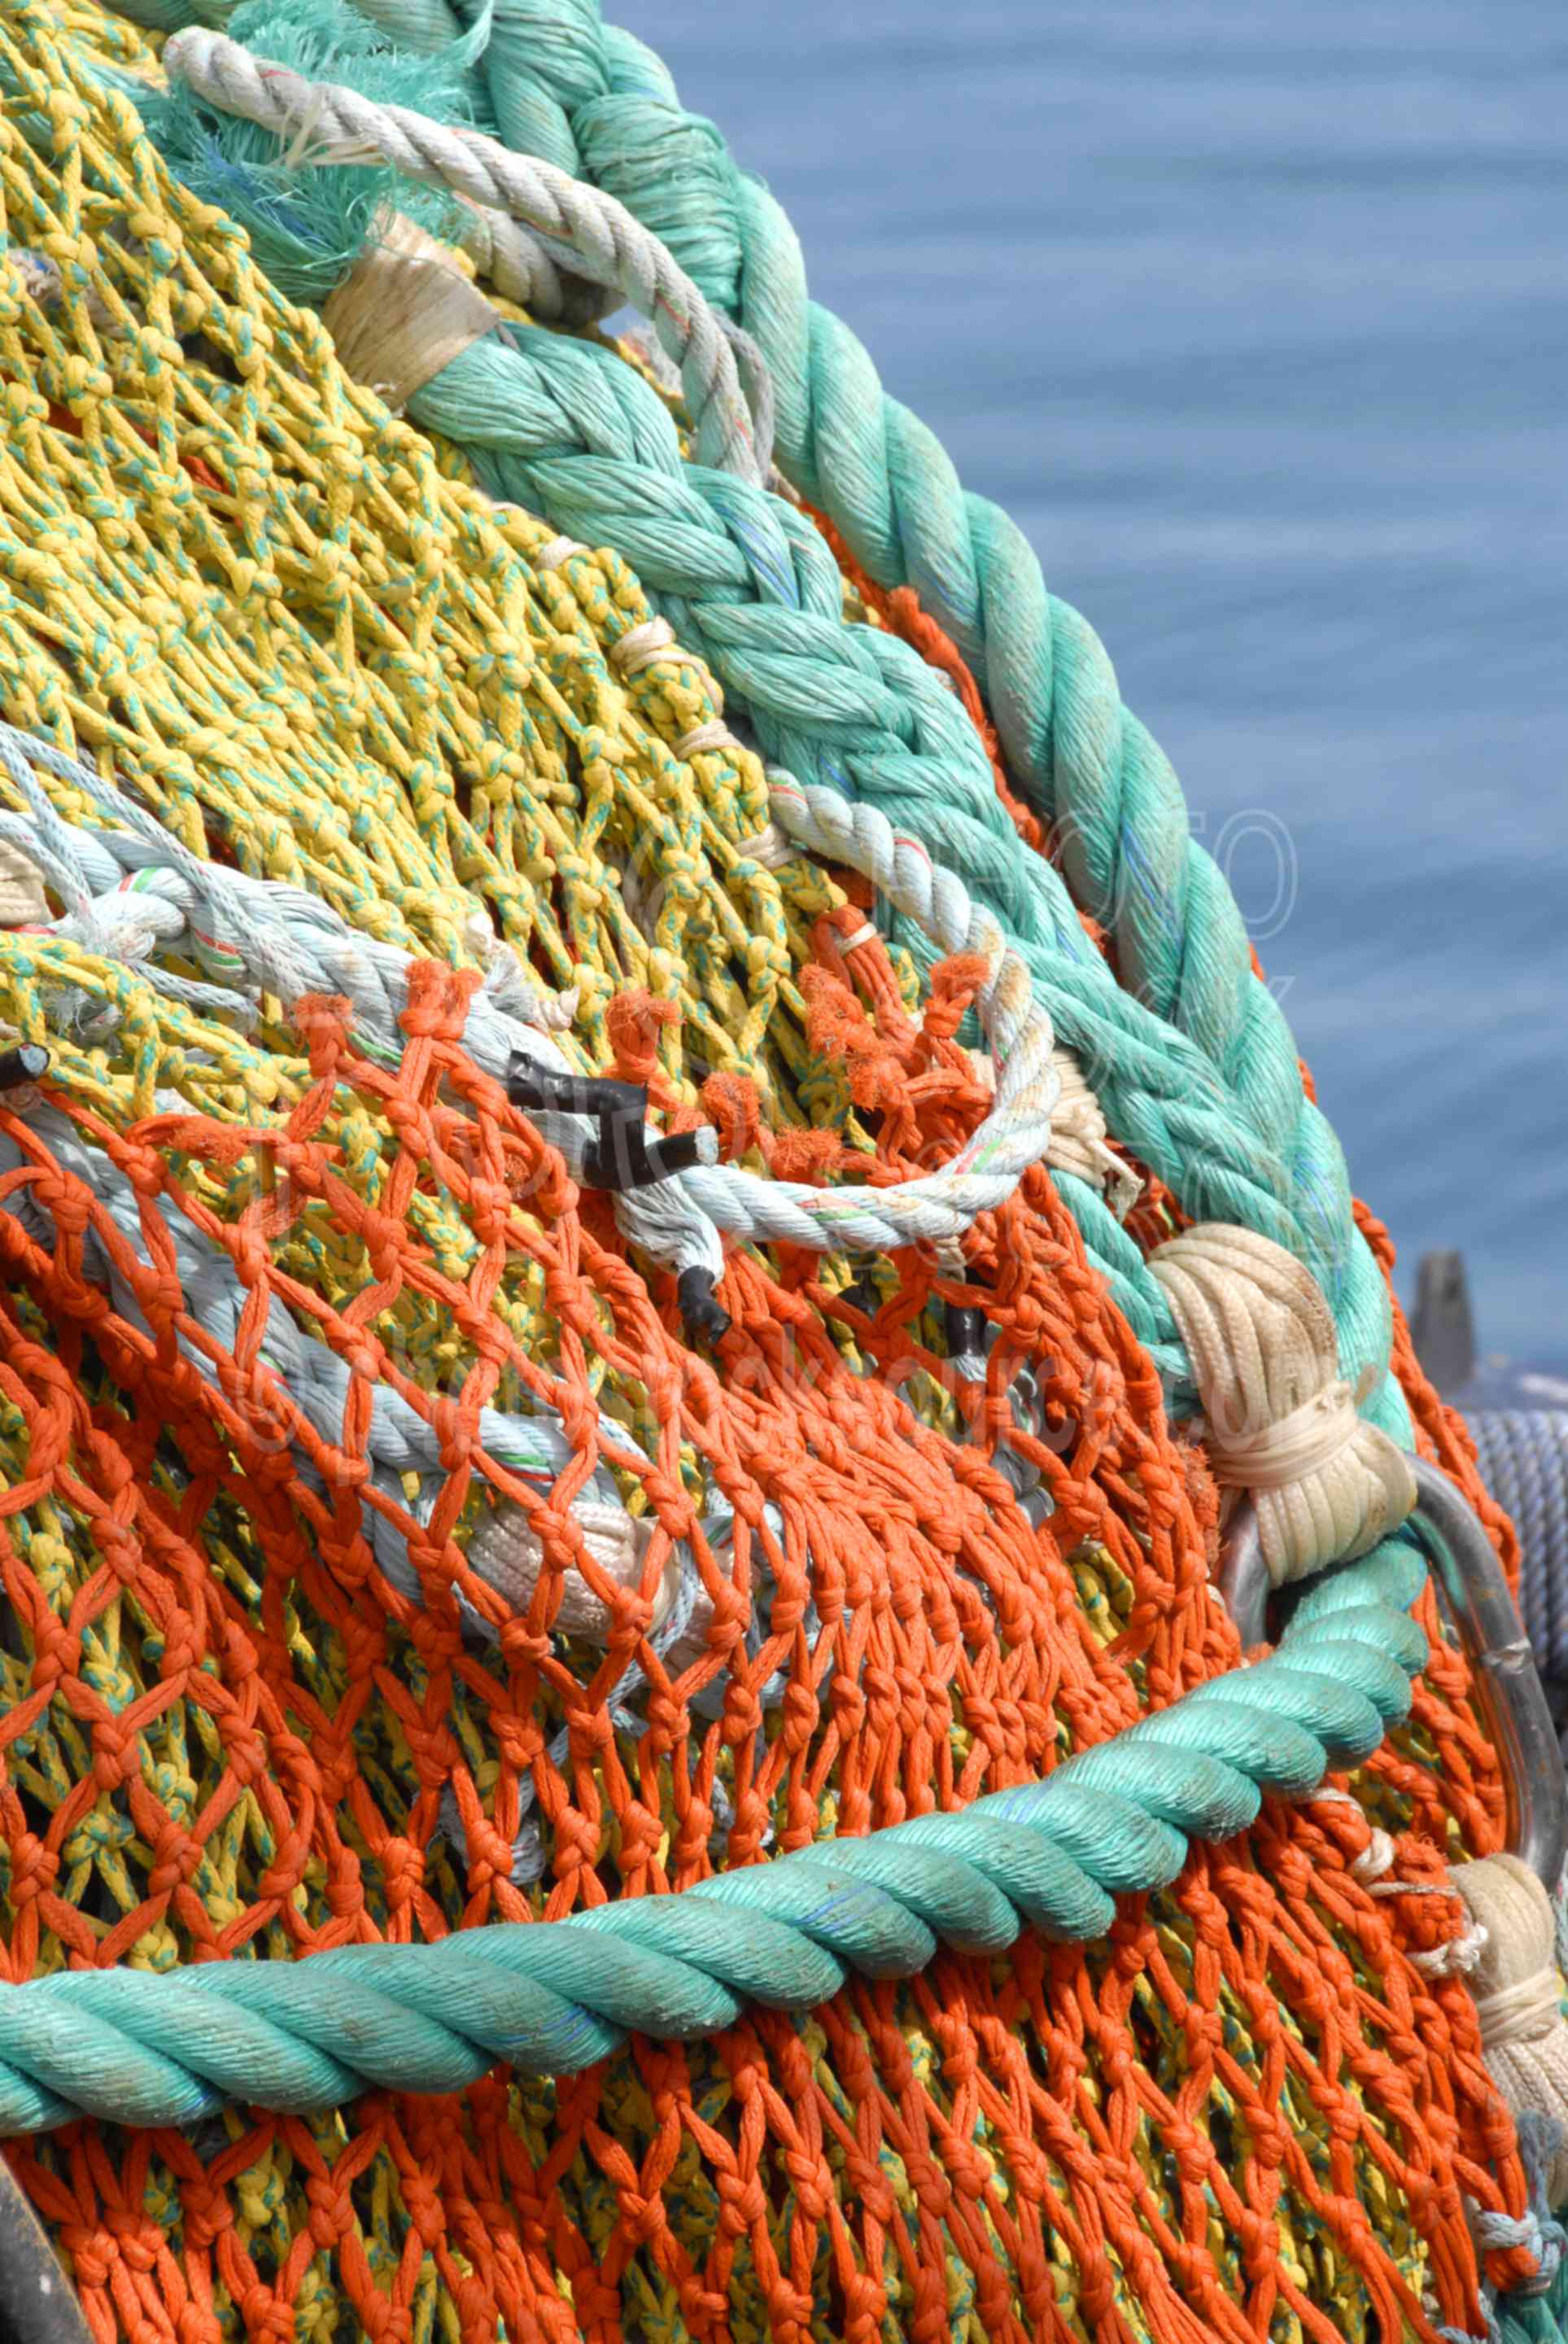 Colorful Fishing Nets,color,colors,colorful,net,fishing,fishing nets,dock,wharf,waterfront